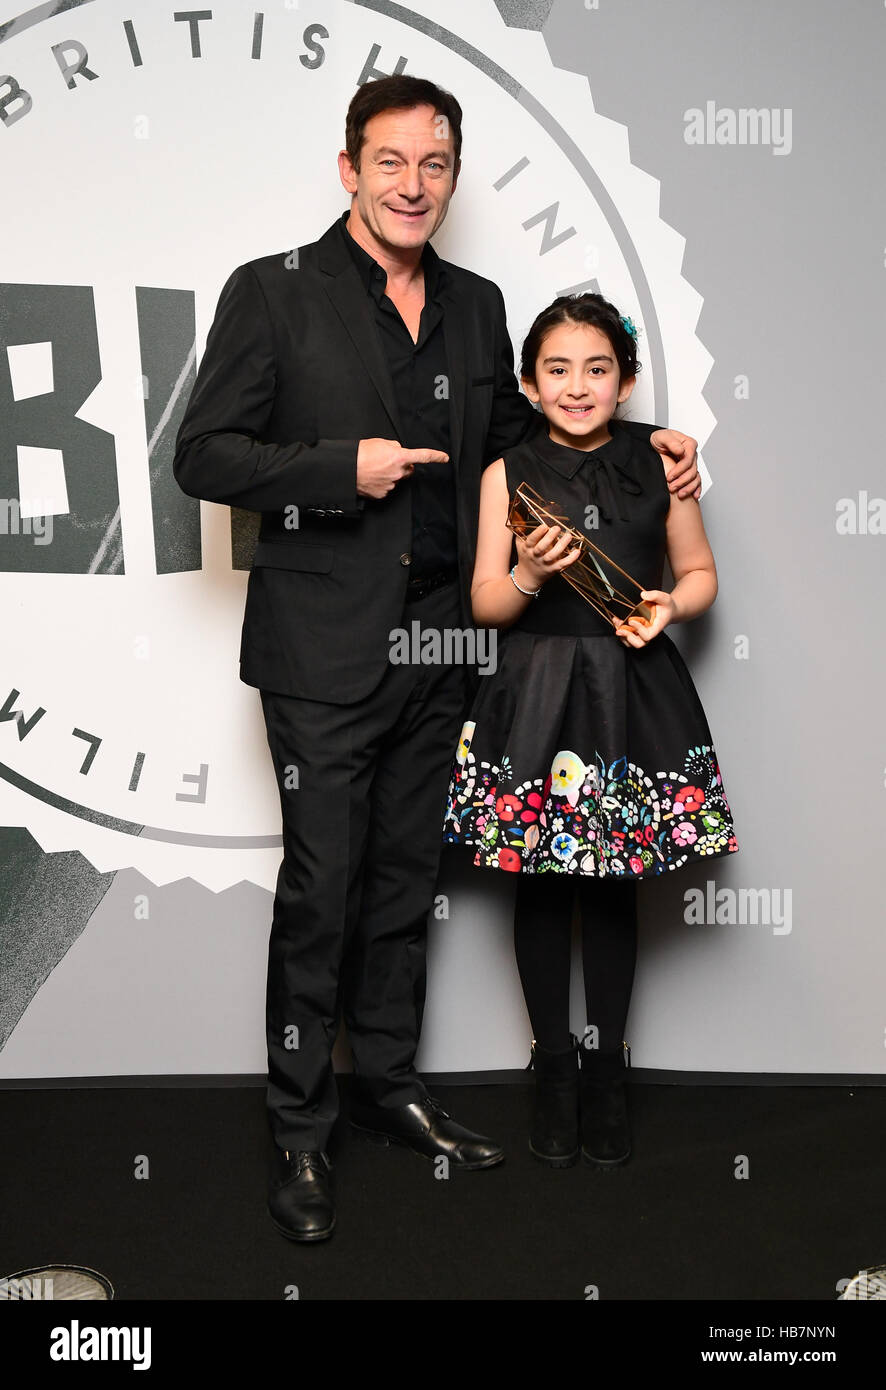 Avin Manshadi with the Best Supporting Actress Award for Under the Shadow, alongside presenter Jason Isaacs during the British Independent Film Awards, at Old Billingsgate Market, London. Stock Photo